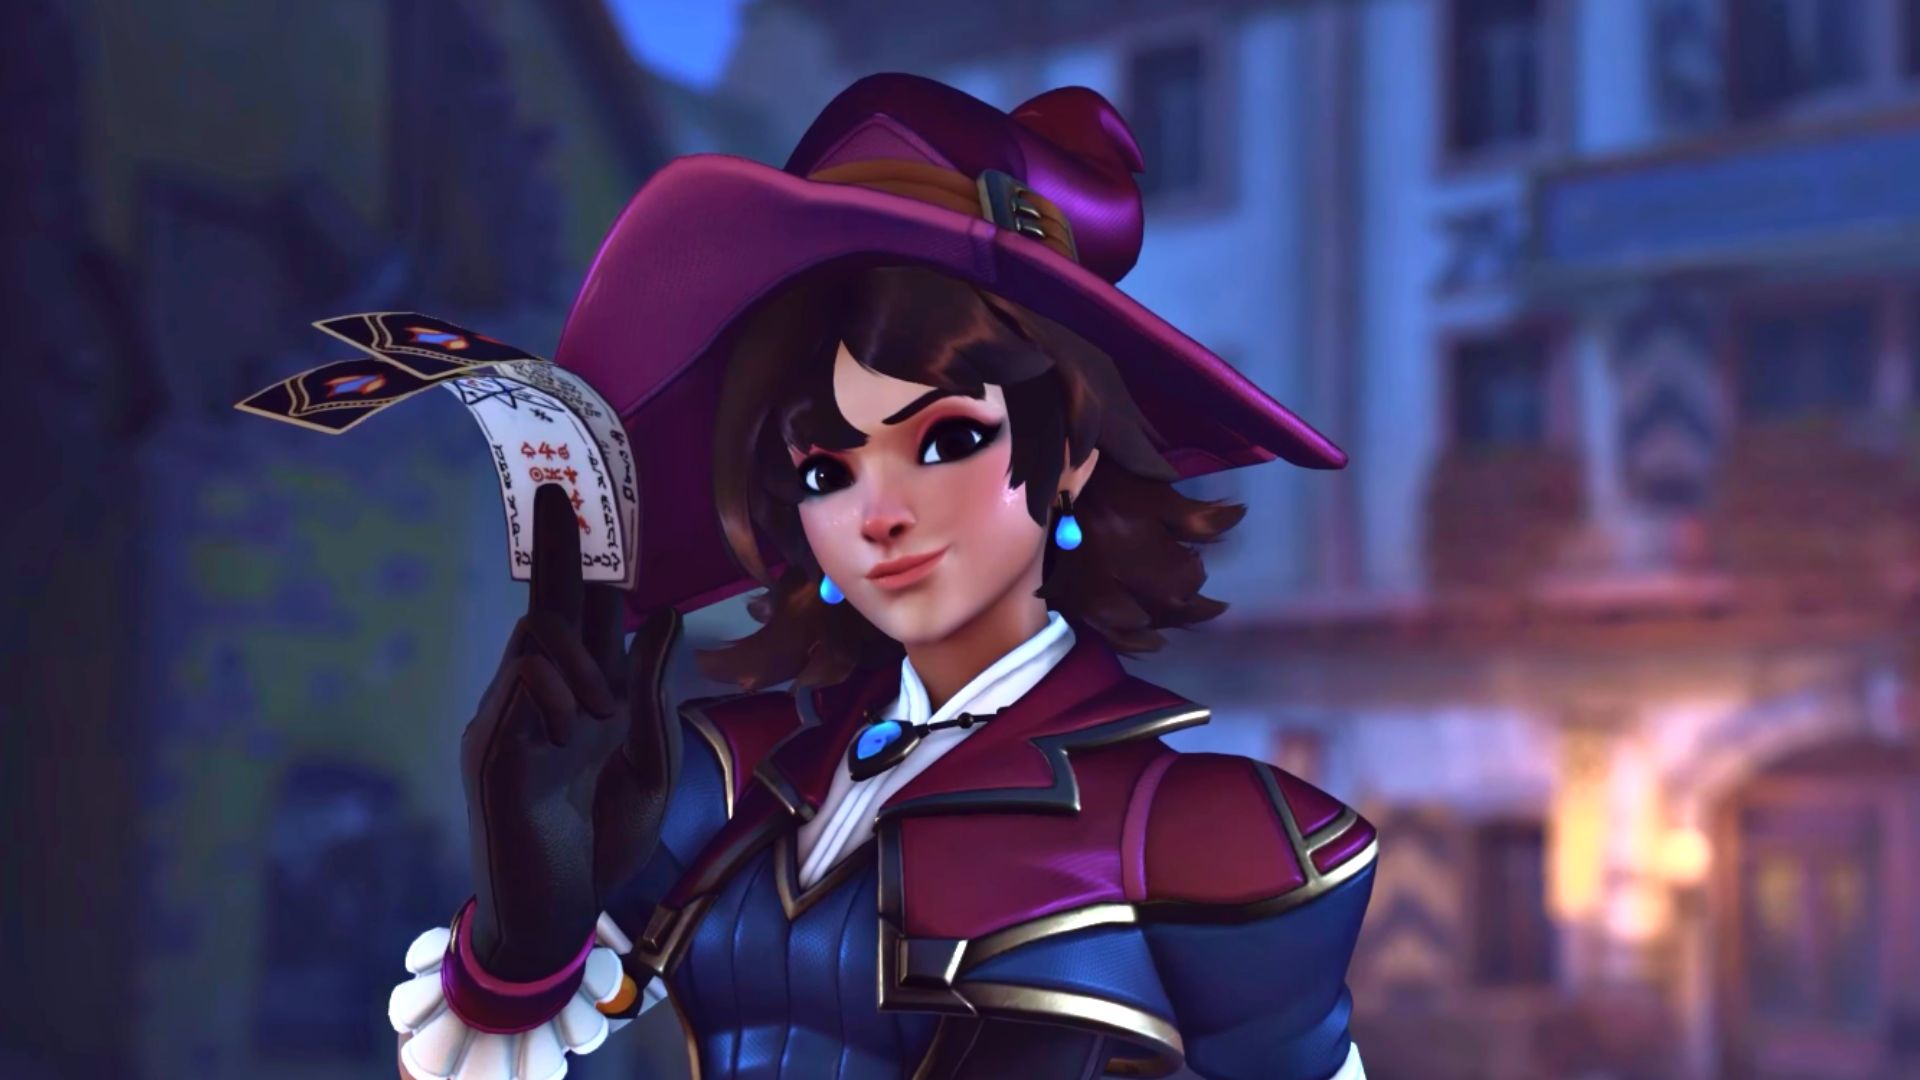 Overwatch 2 character skins now sold separately, players still miffed